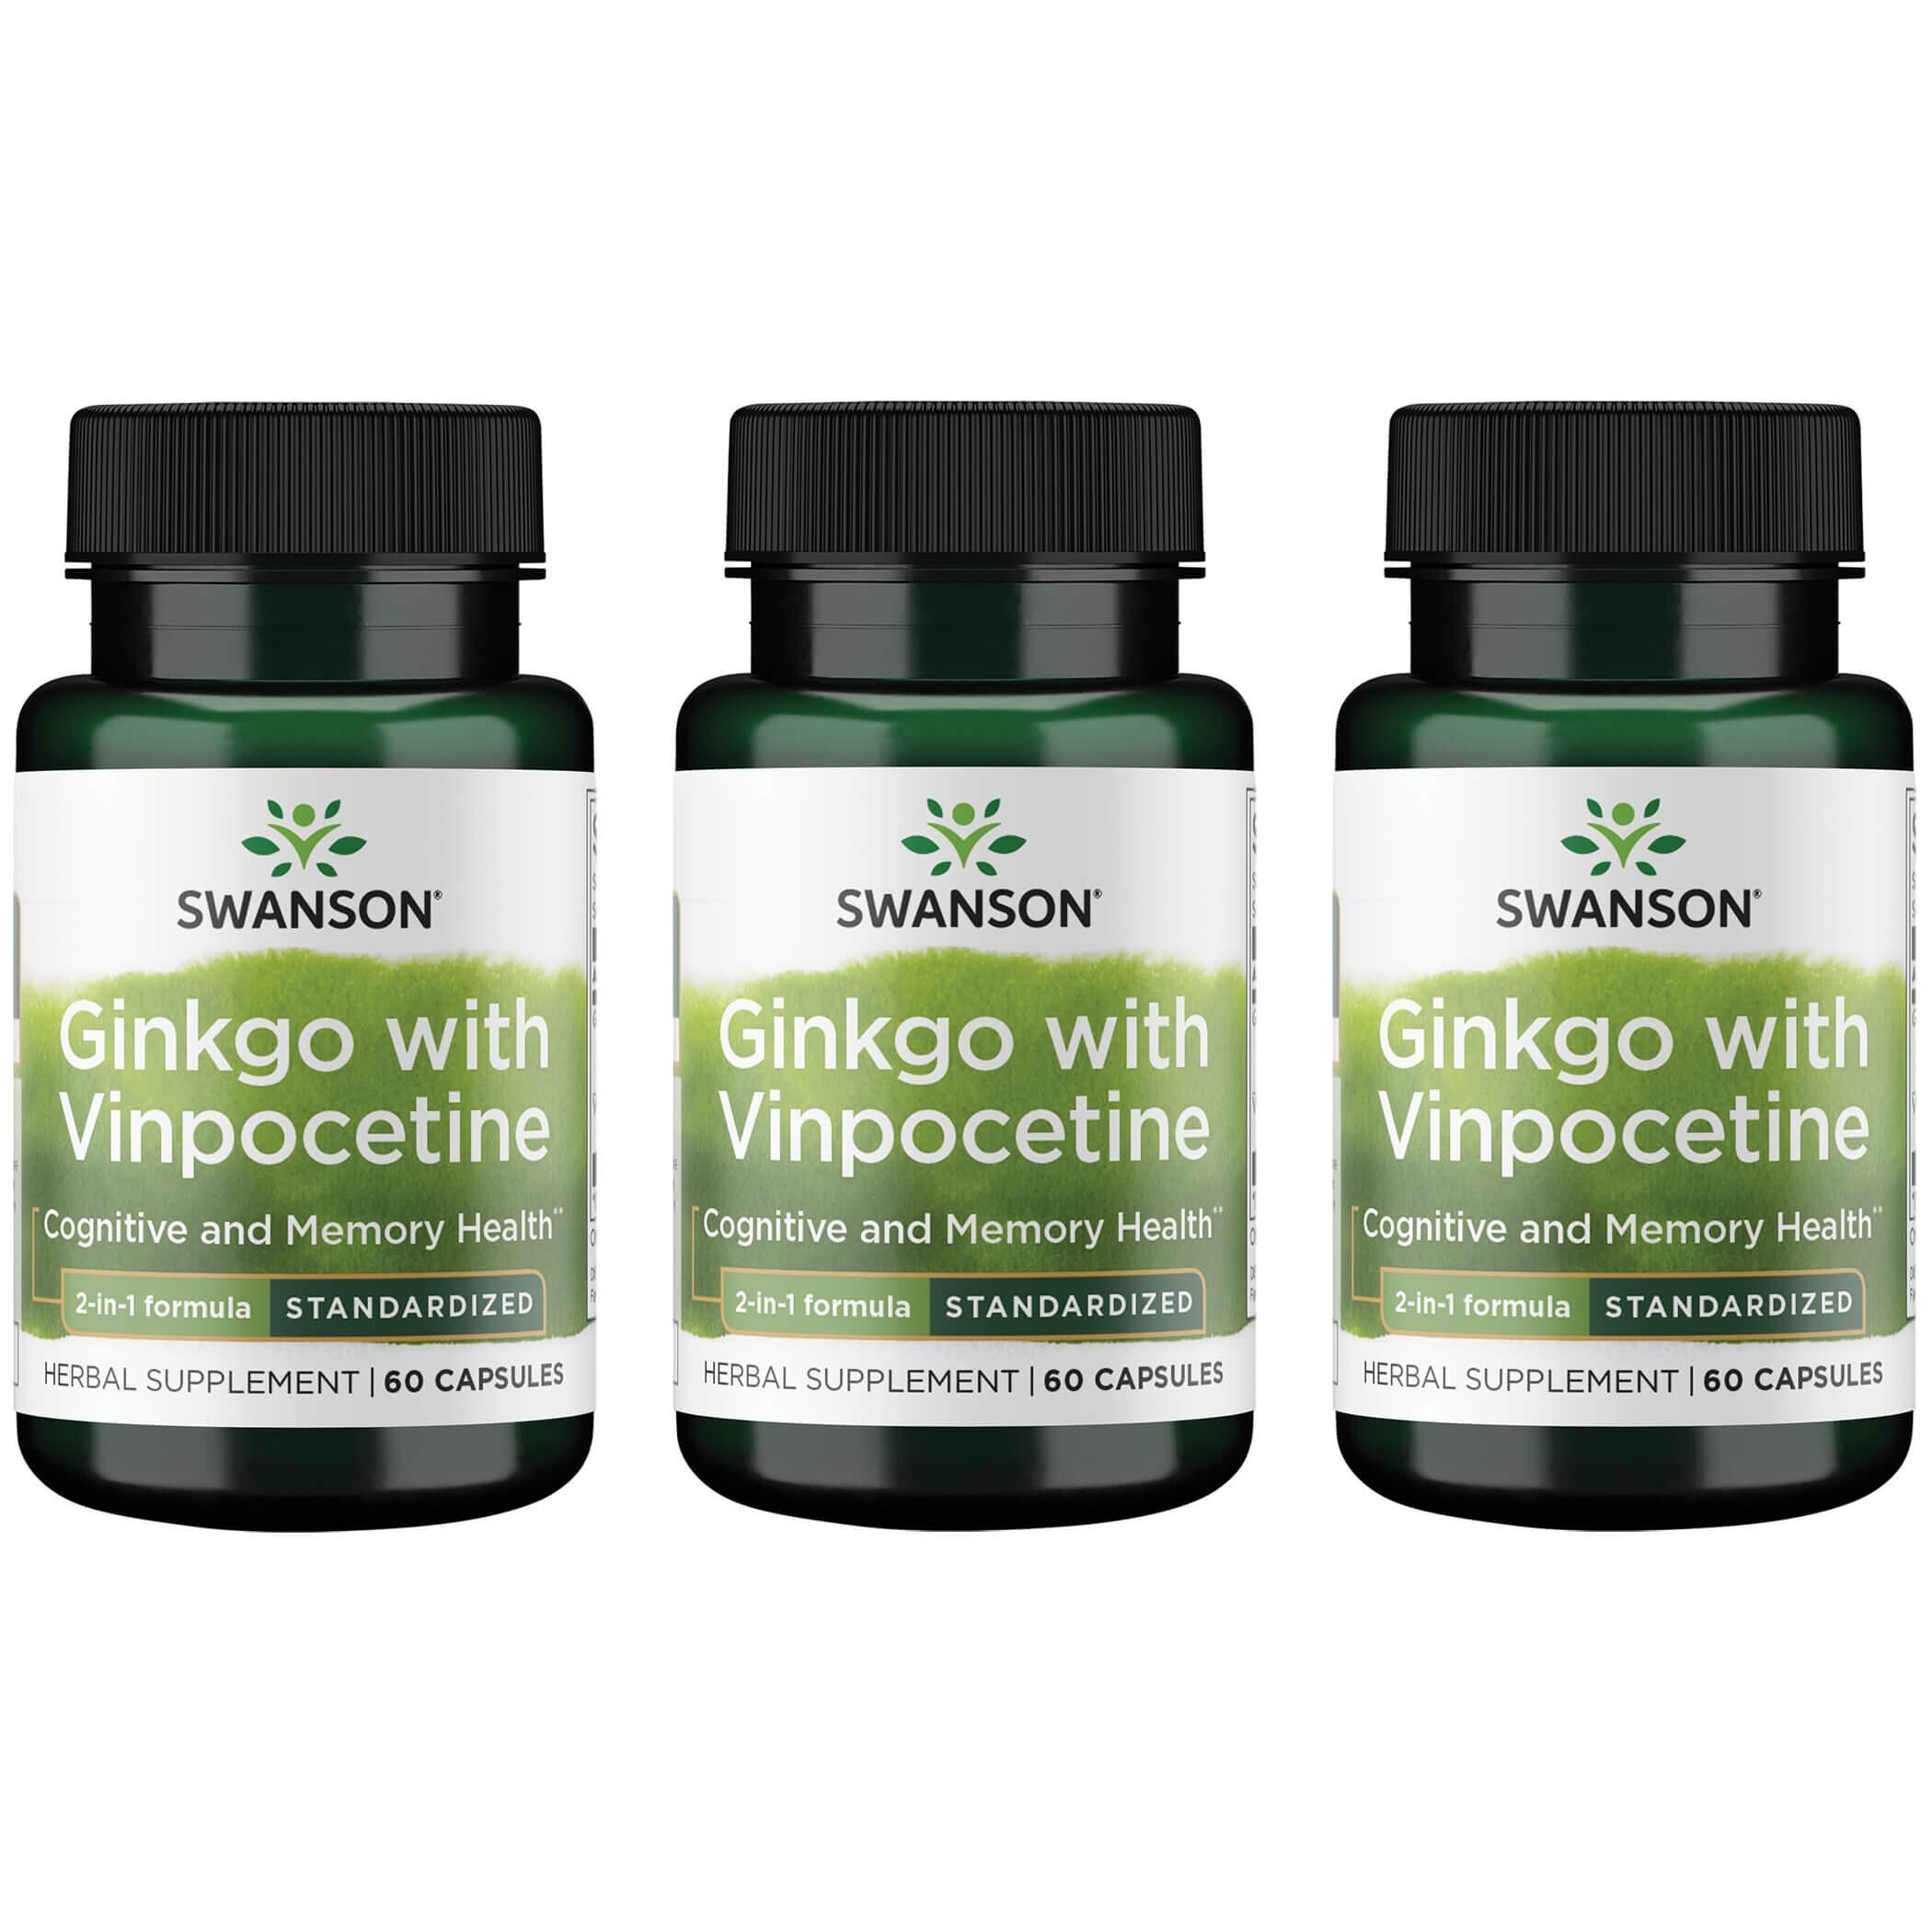 Swanson Superior Herbs Ginkgo with Vinpocetine - Standardized 3 Pack Vitamin 60 Caps